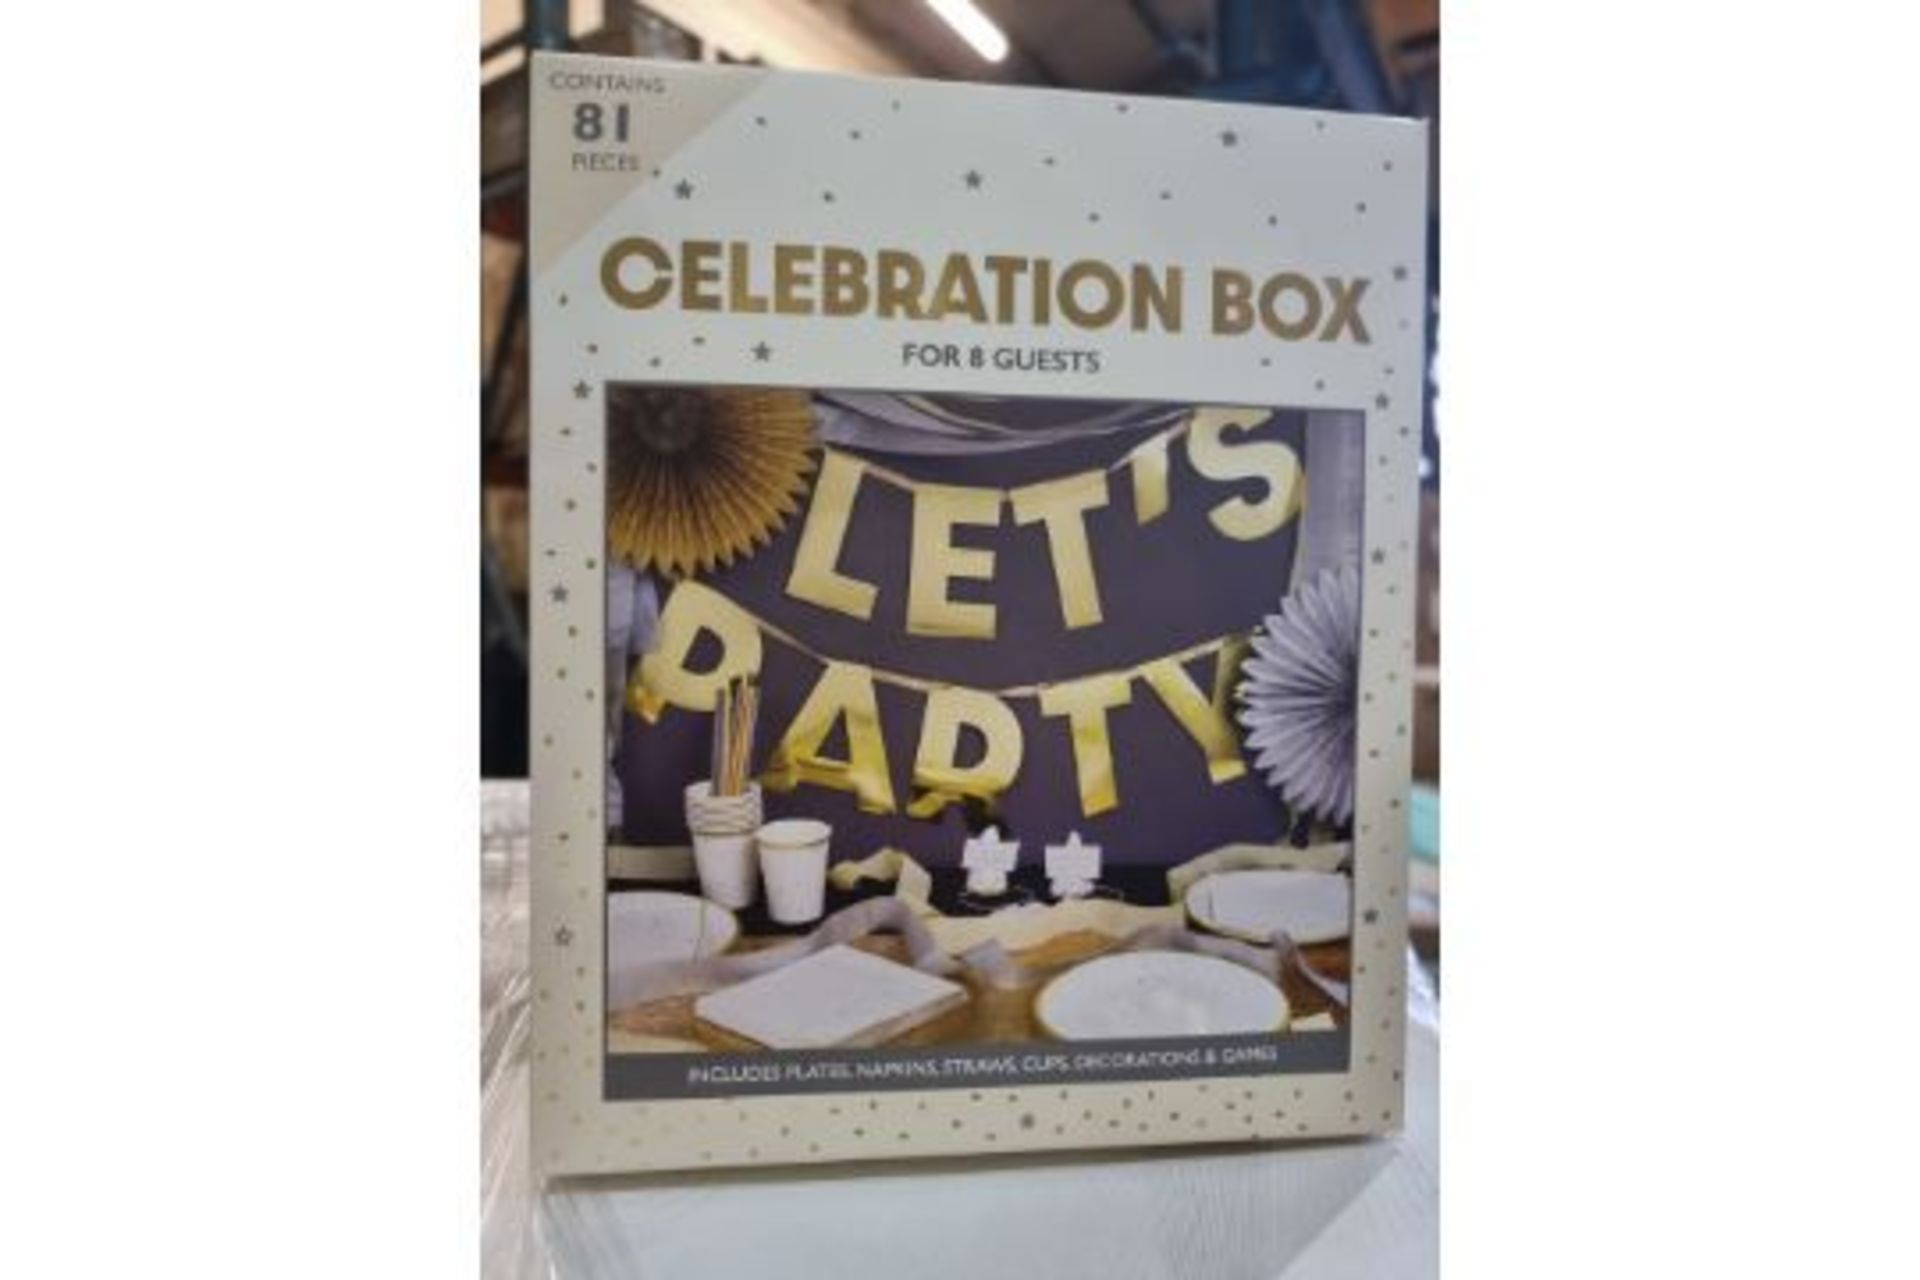 PALLET TO CONTAIN 108 x NEW 81 PIECE CELEBRATION BOXES FOR 8 GUESTS. INCLUDES: PLATES, NAPKINS, - Image 2 of 2